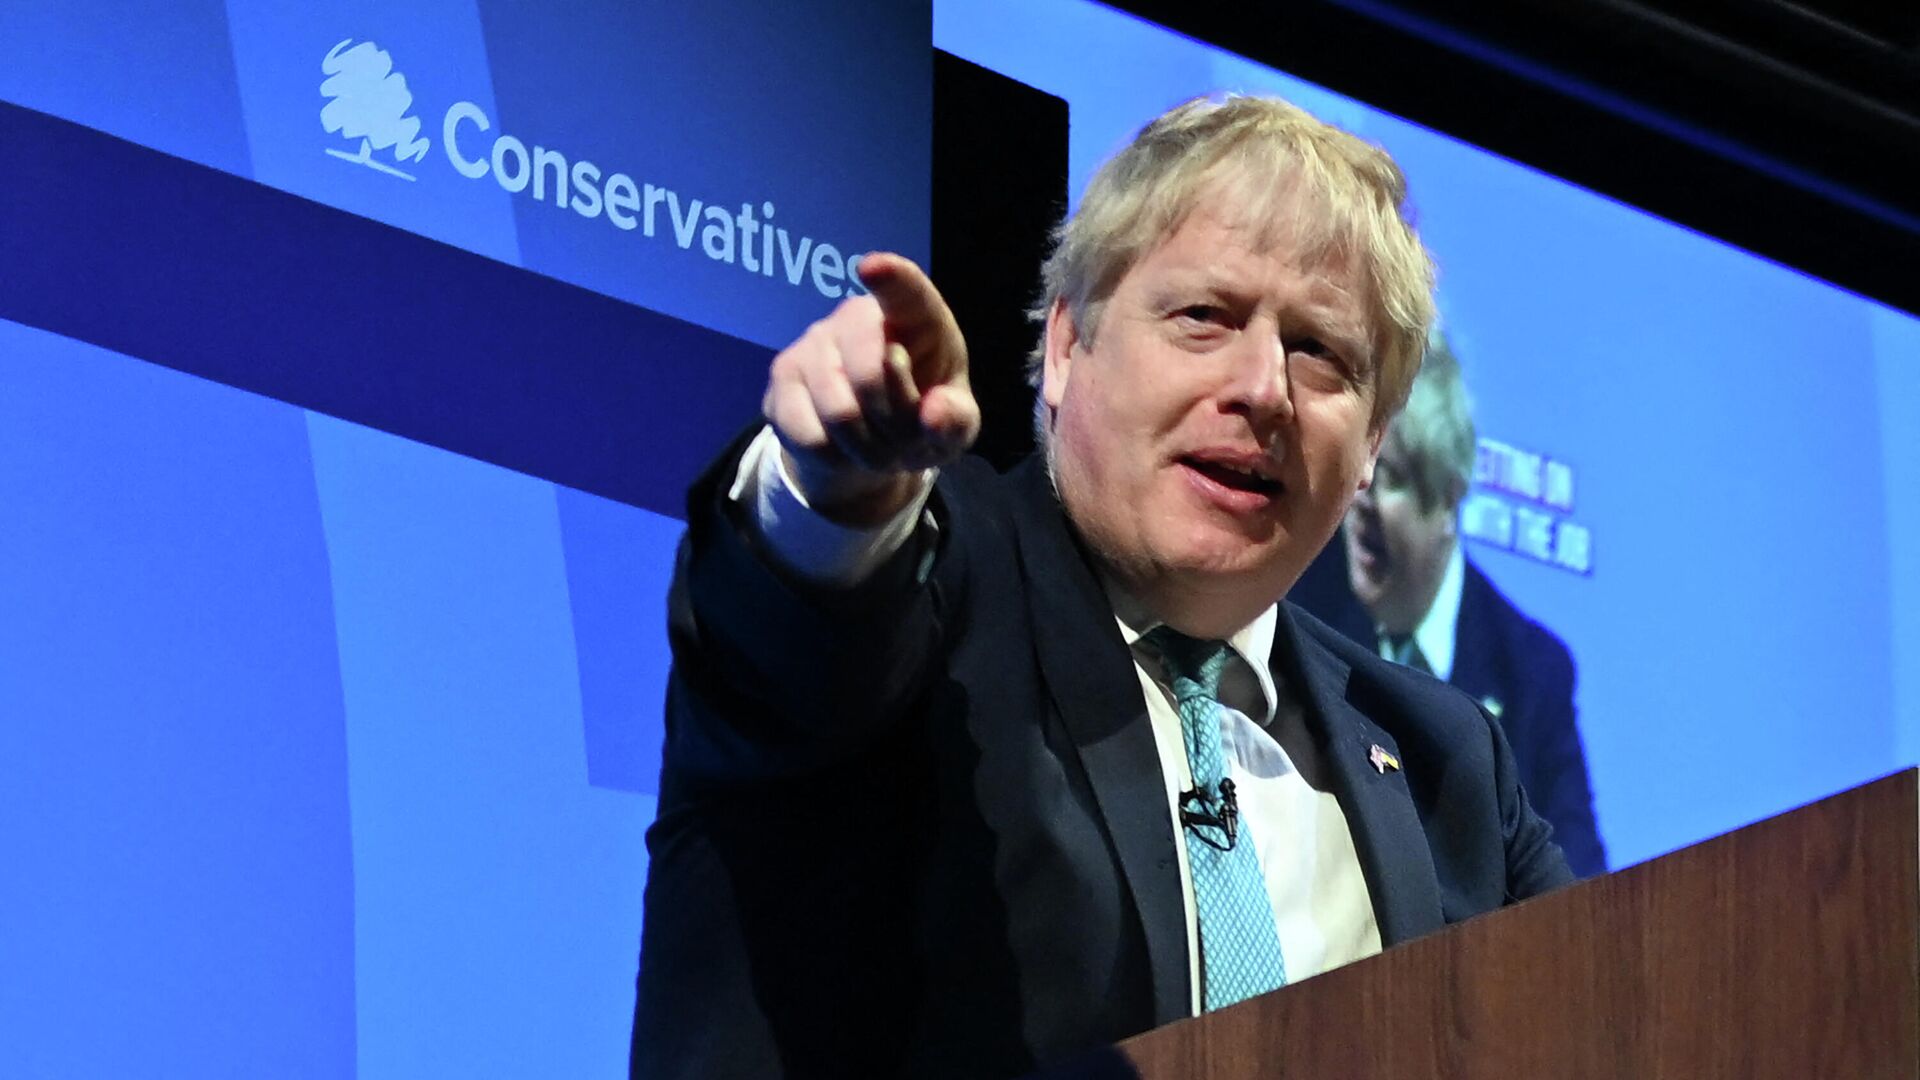 Britain's Prime Minister Boris Johnson speaks during the Conservative Party Spring Conference at Blackpool Winter Gardens in Blackpool, north-west England, on March 19, 2022 - Sputnik International, 1920, 20.03.2022